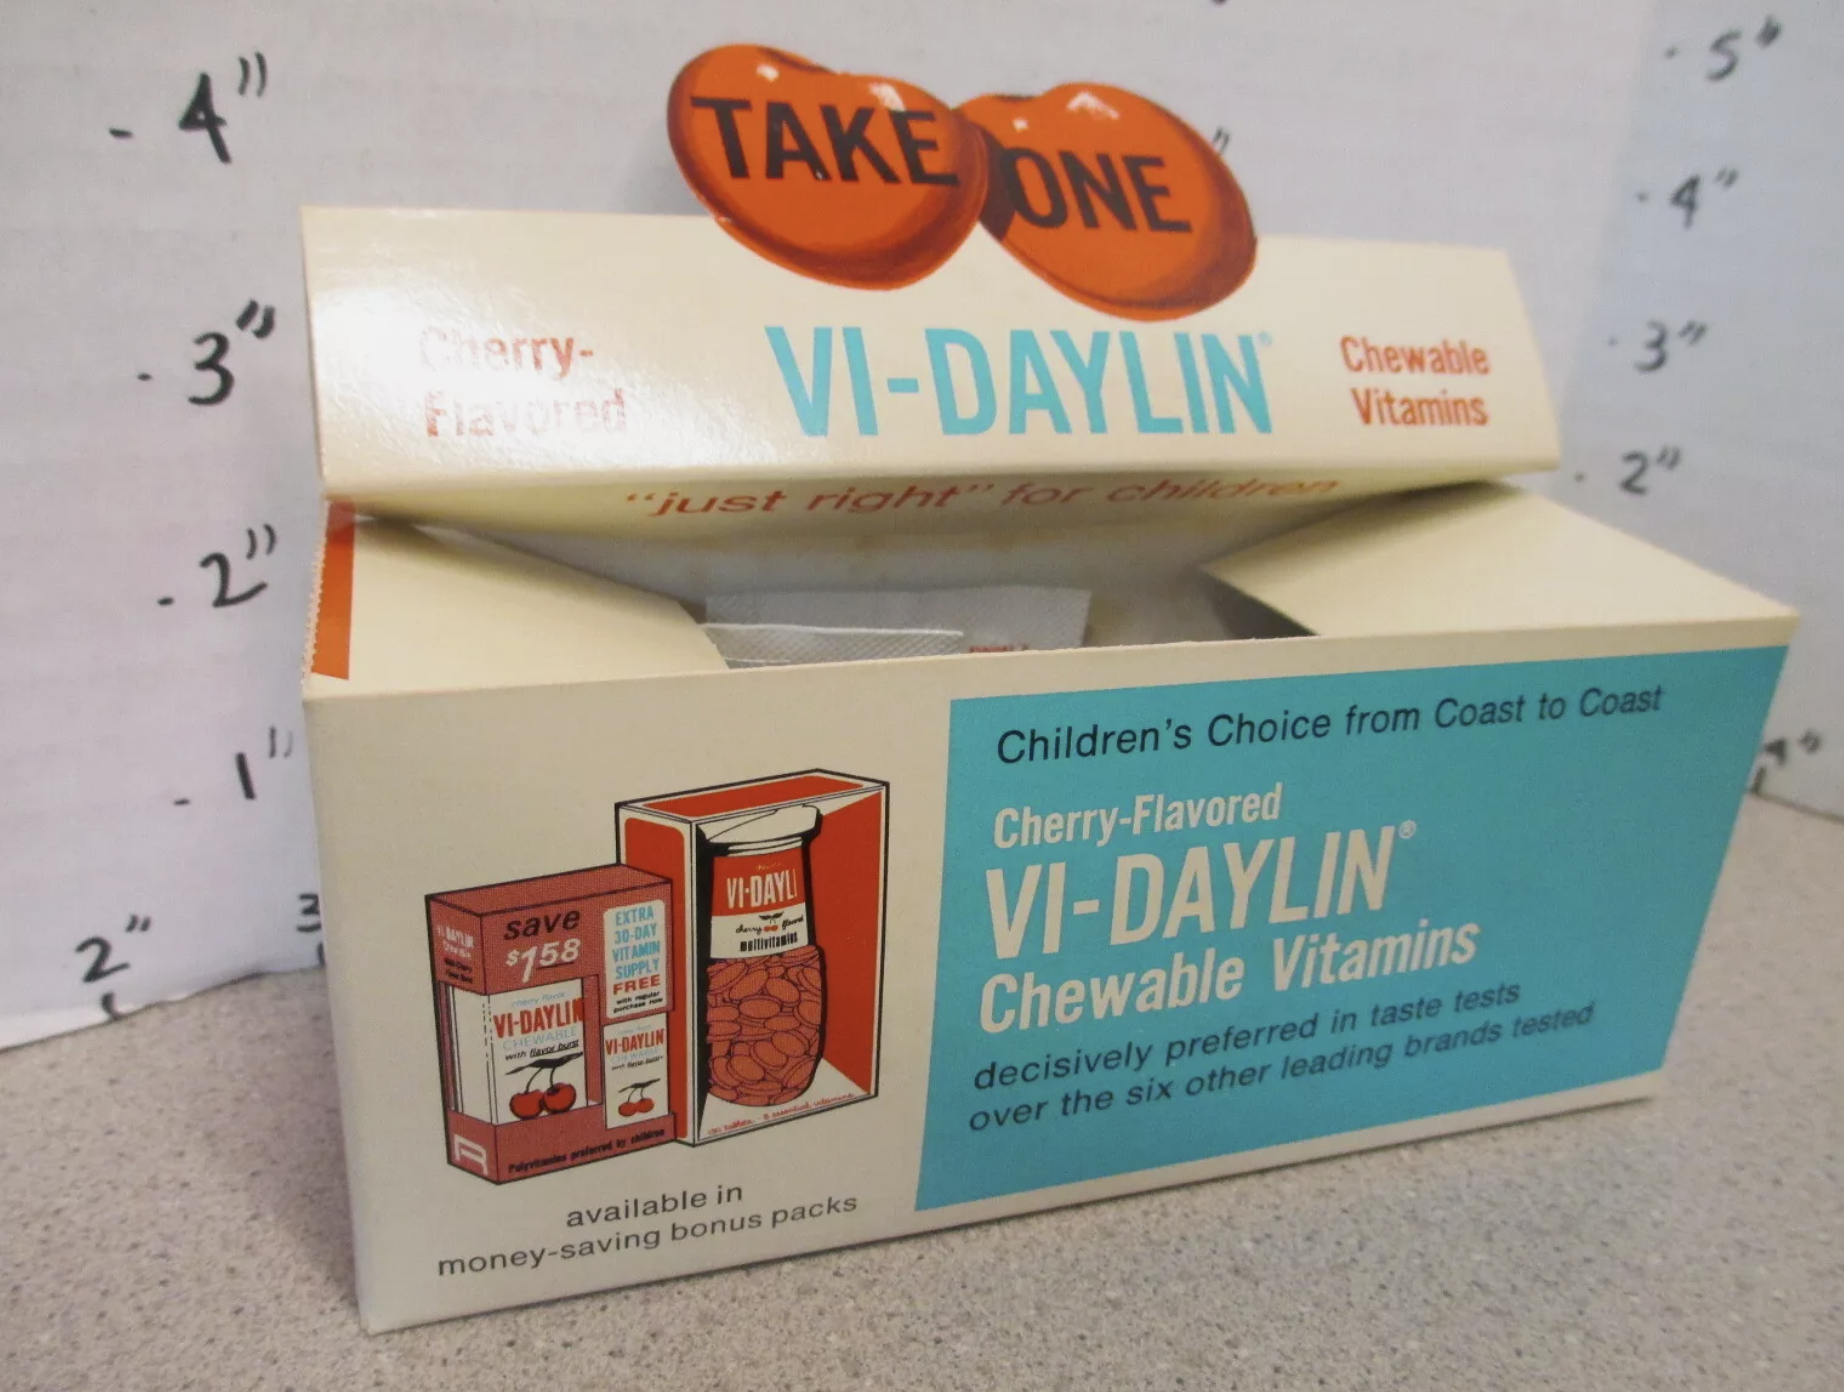 Box of Vi-Daylin cherry-flavored chewable vitamins for children, with &quot;Take One&quot; sign on top. The box highlights availability in money-saving bonus packs